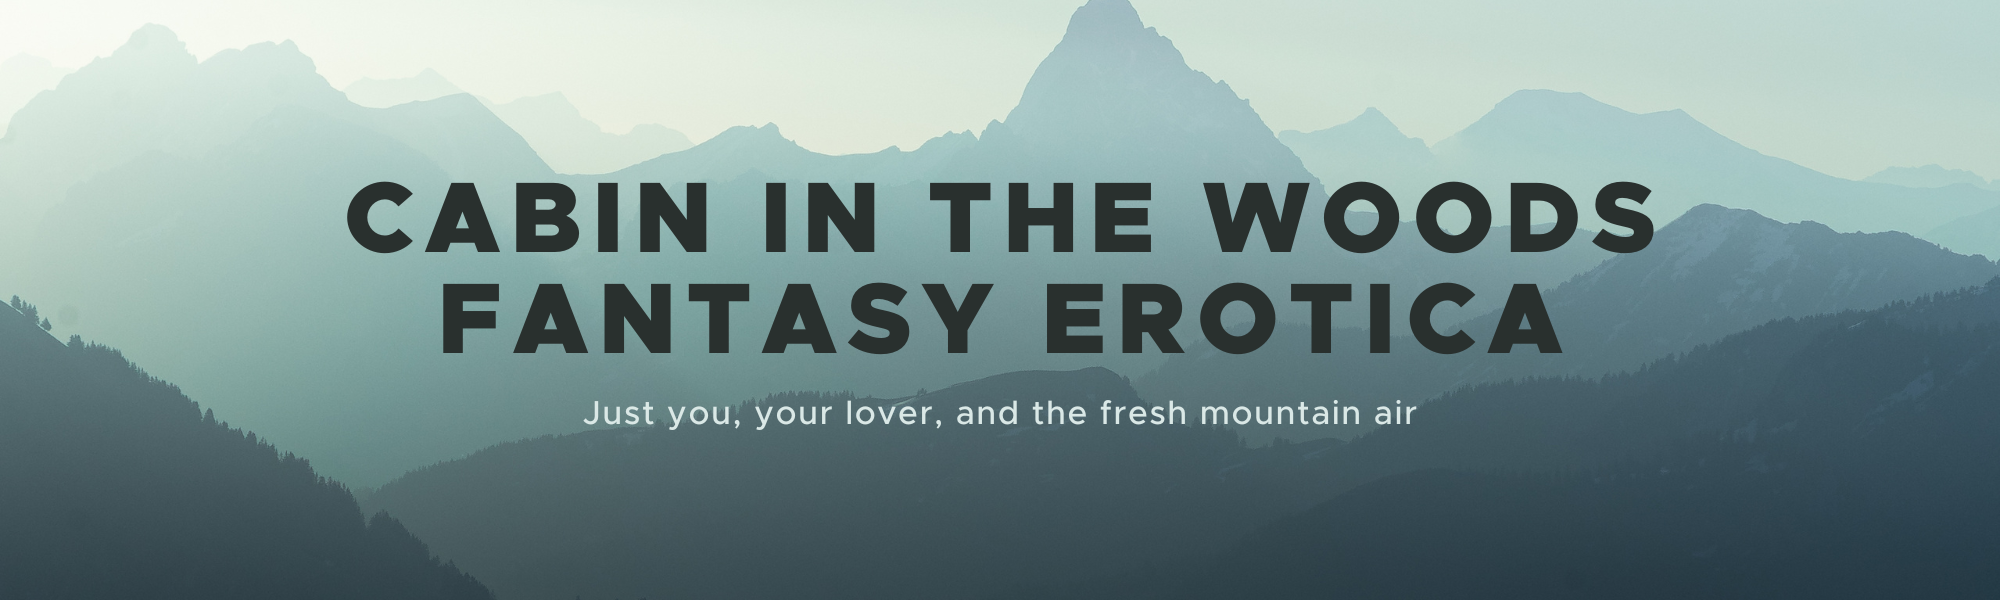 Cabin in the woods fantasy erotica - just you, your lover, and fresh mountain air.